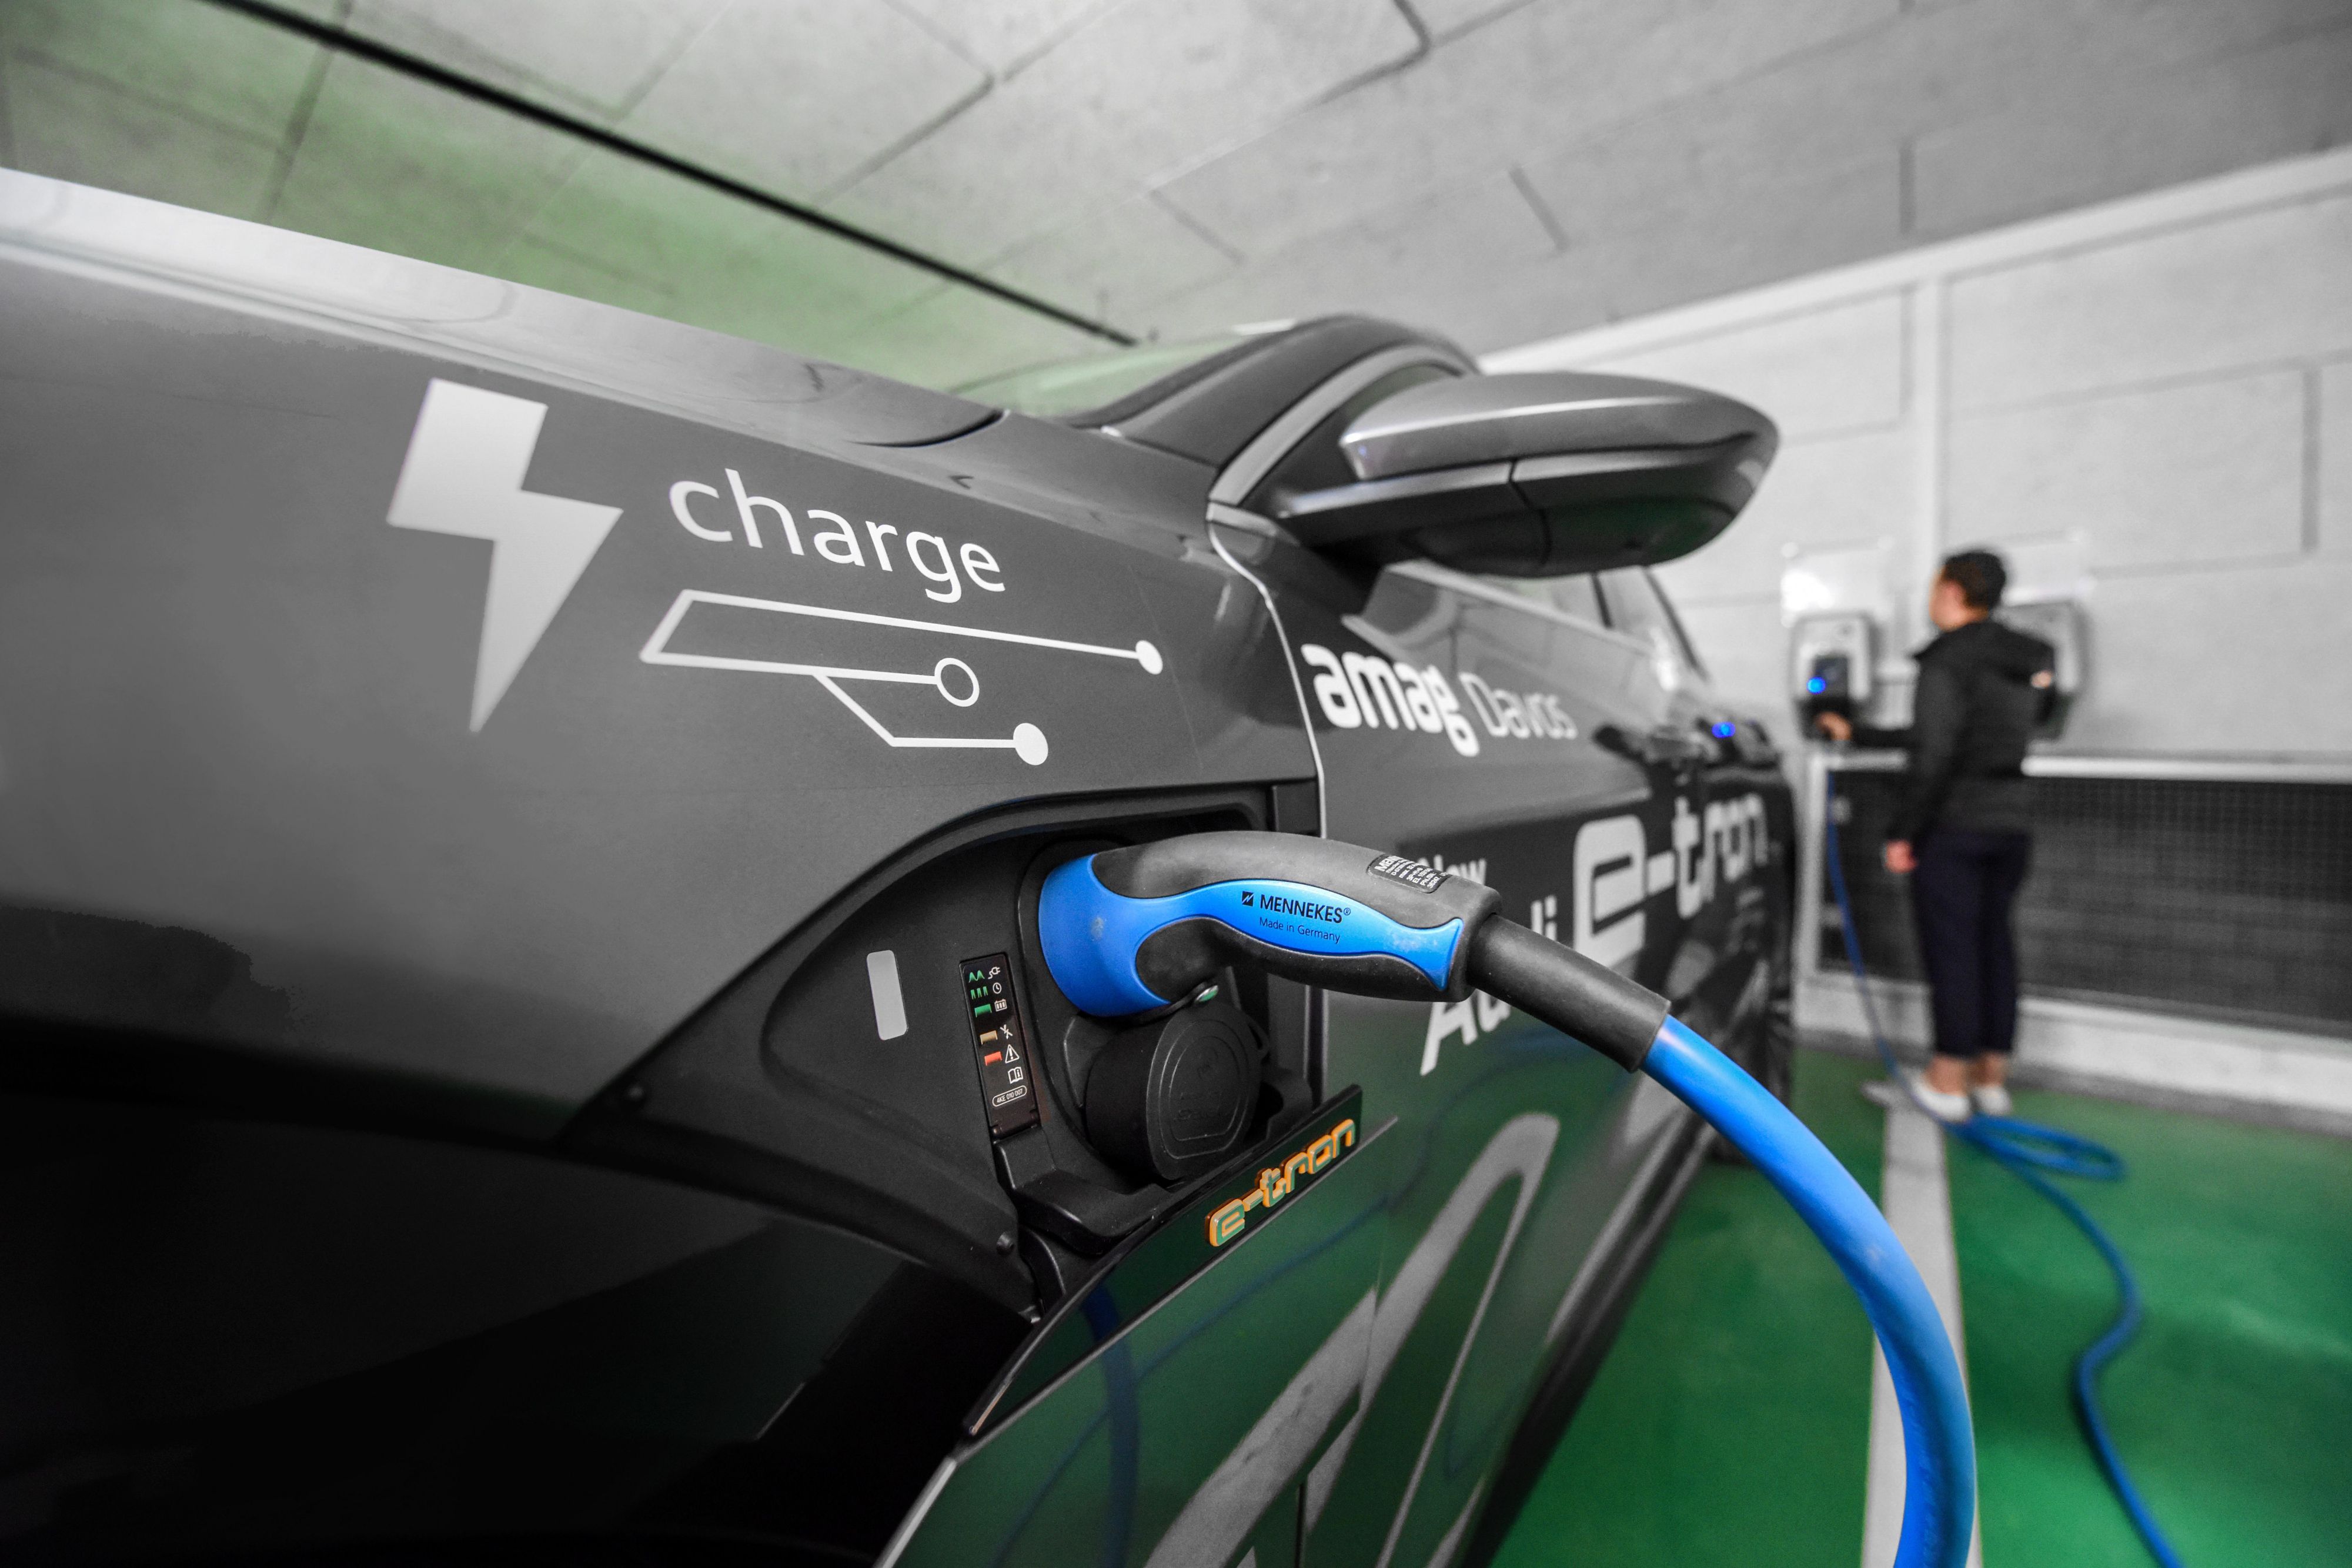 We offer hassle-free and complimentary charging for electric cars in our parking garage for overnight hotel guests.